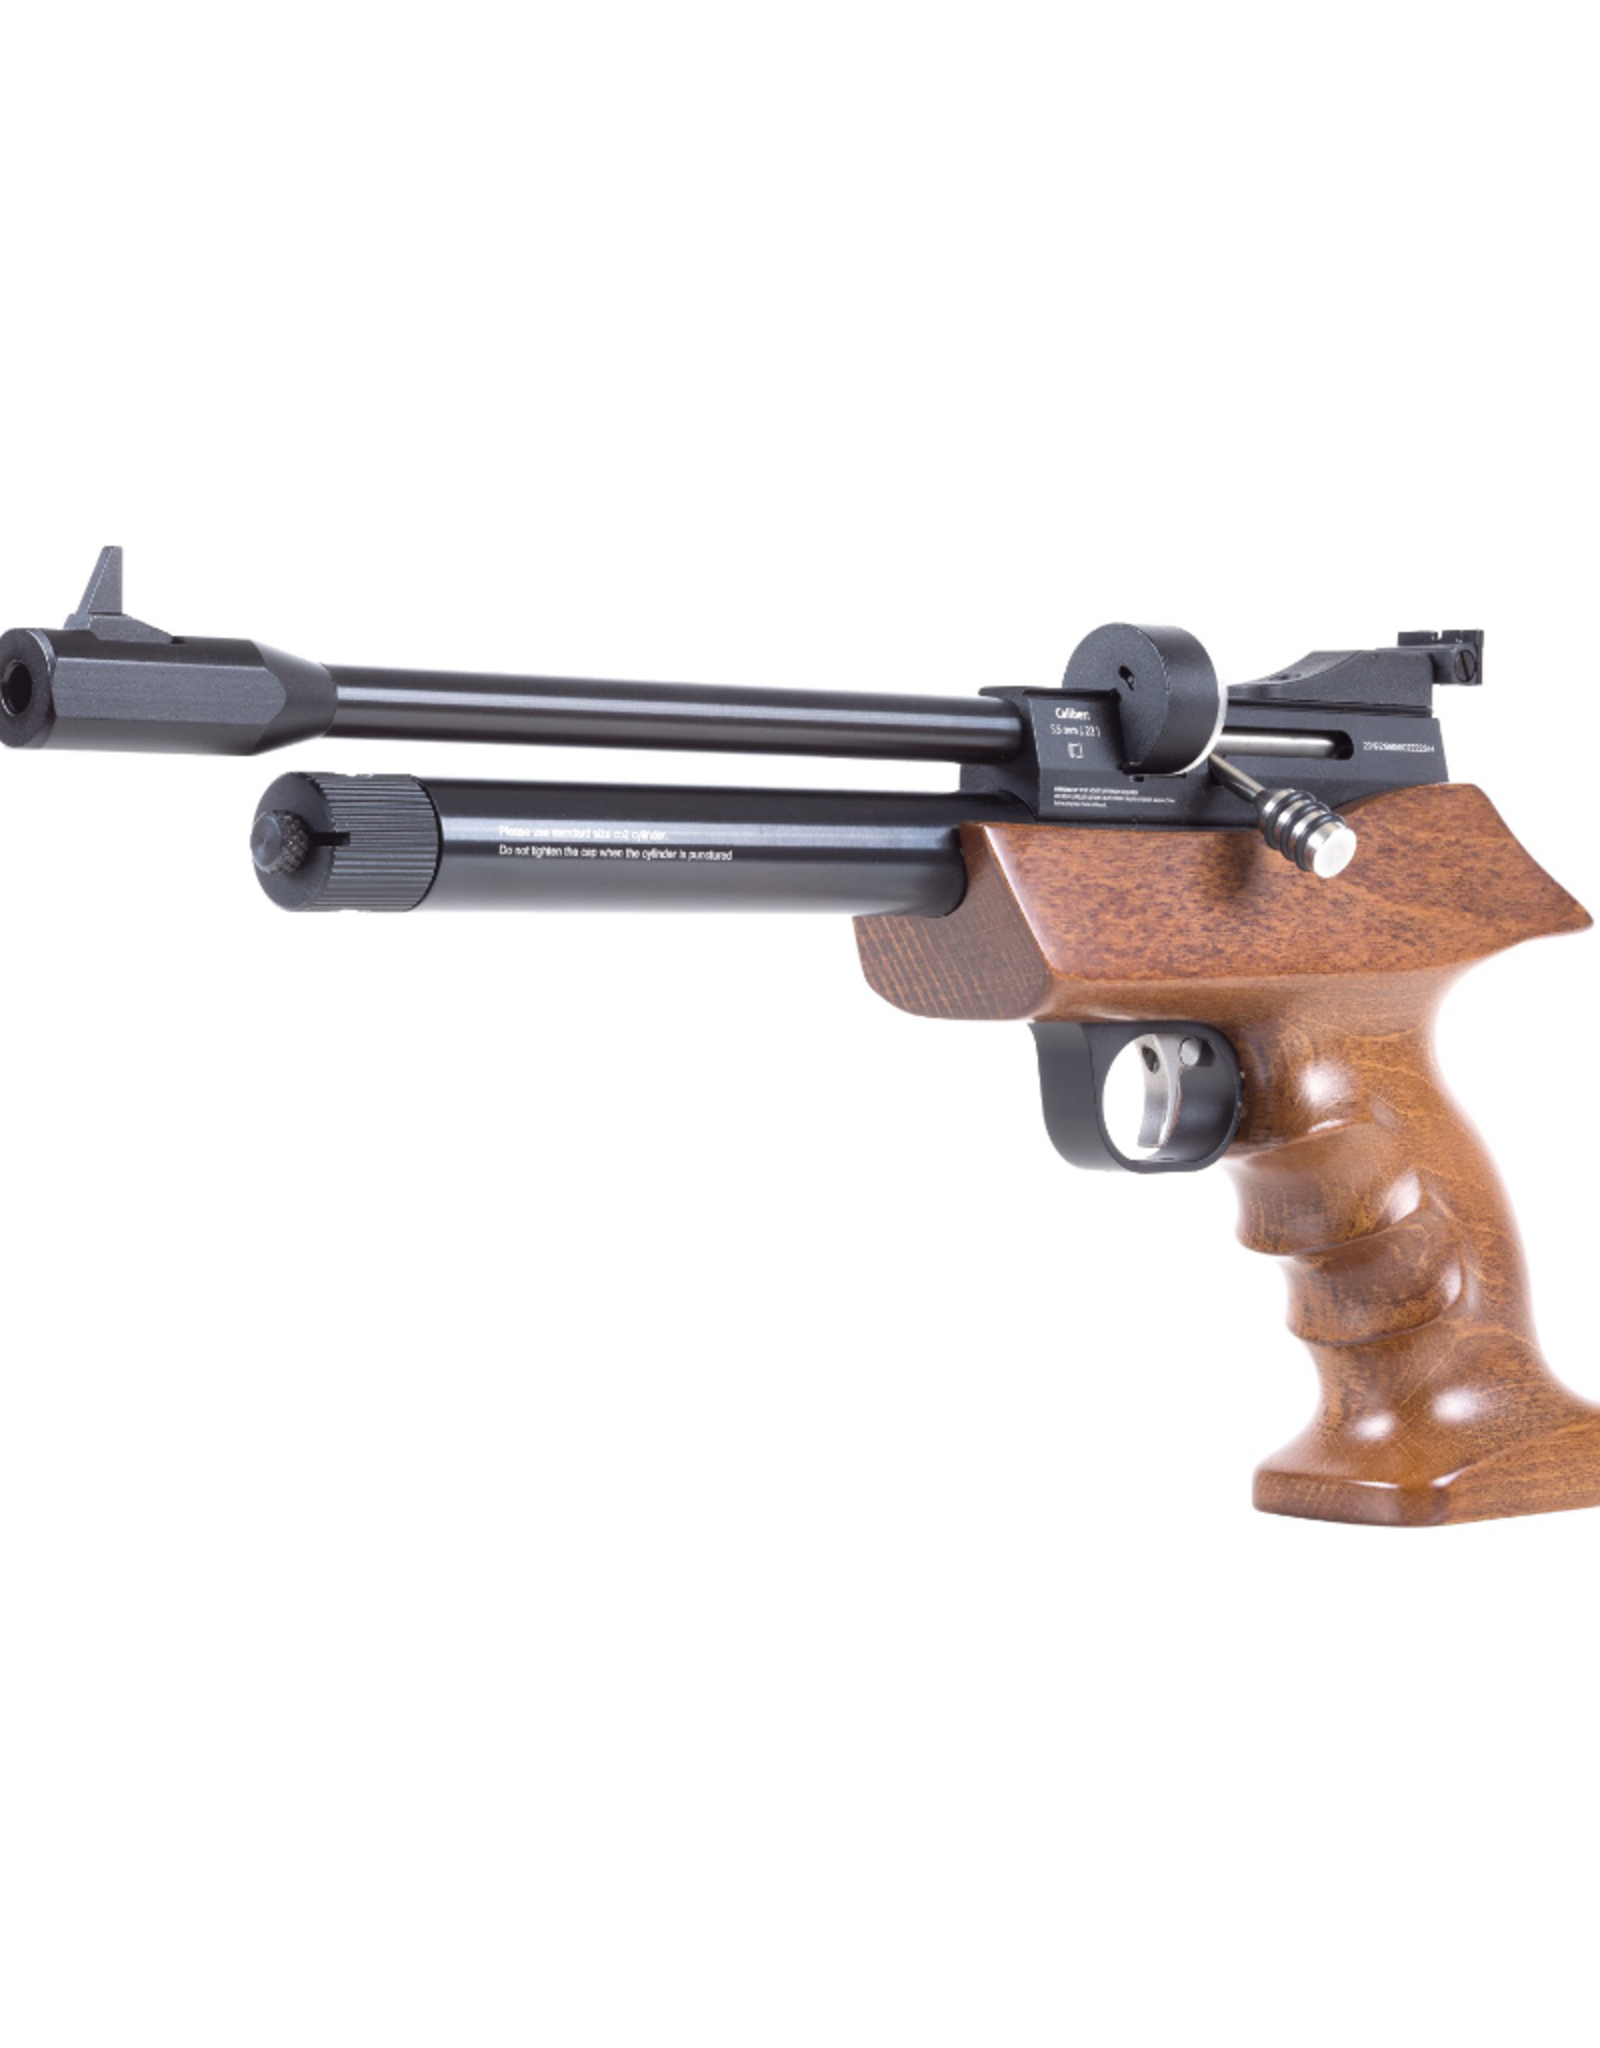 Diana .177 (4.5mm) Cal. Diana Airbug CO2 Air Pistol